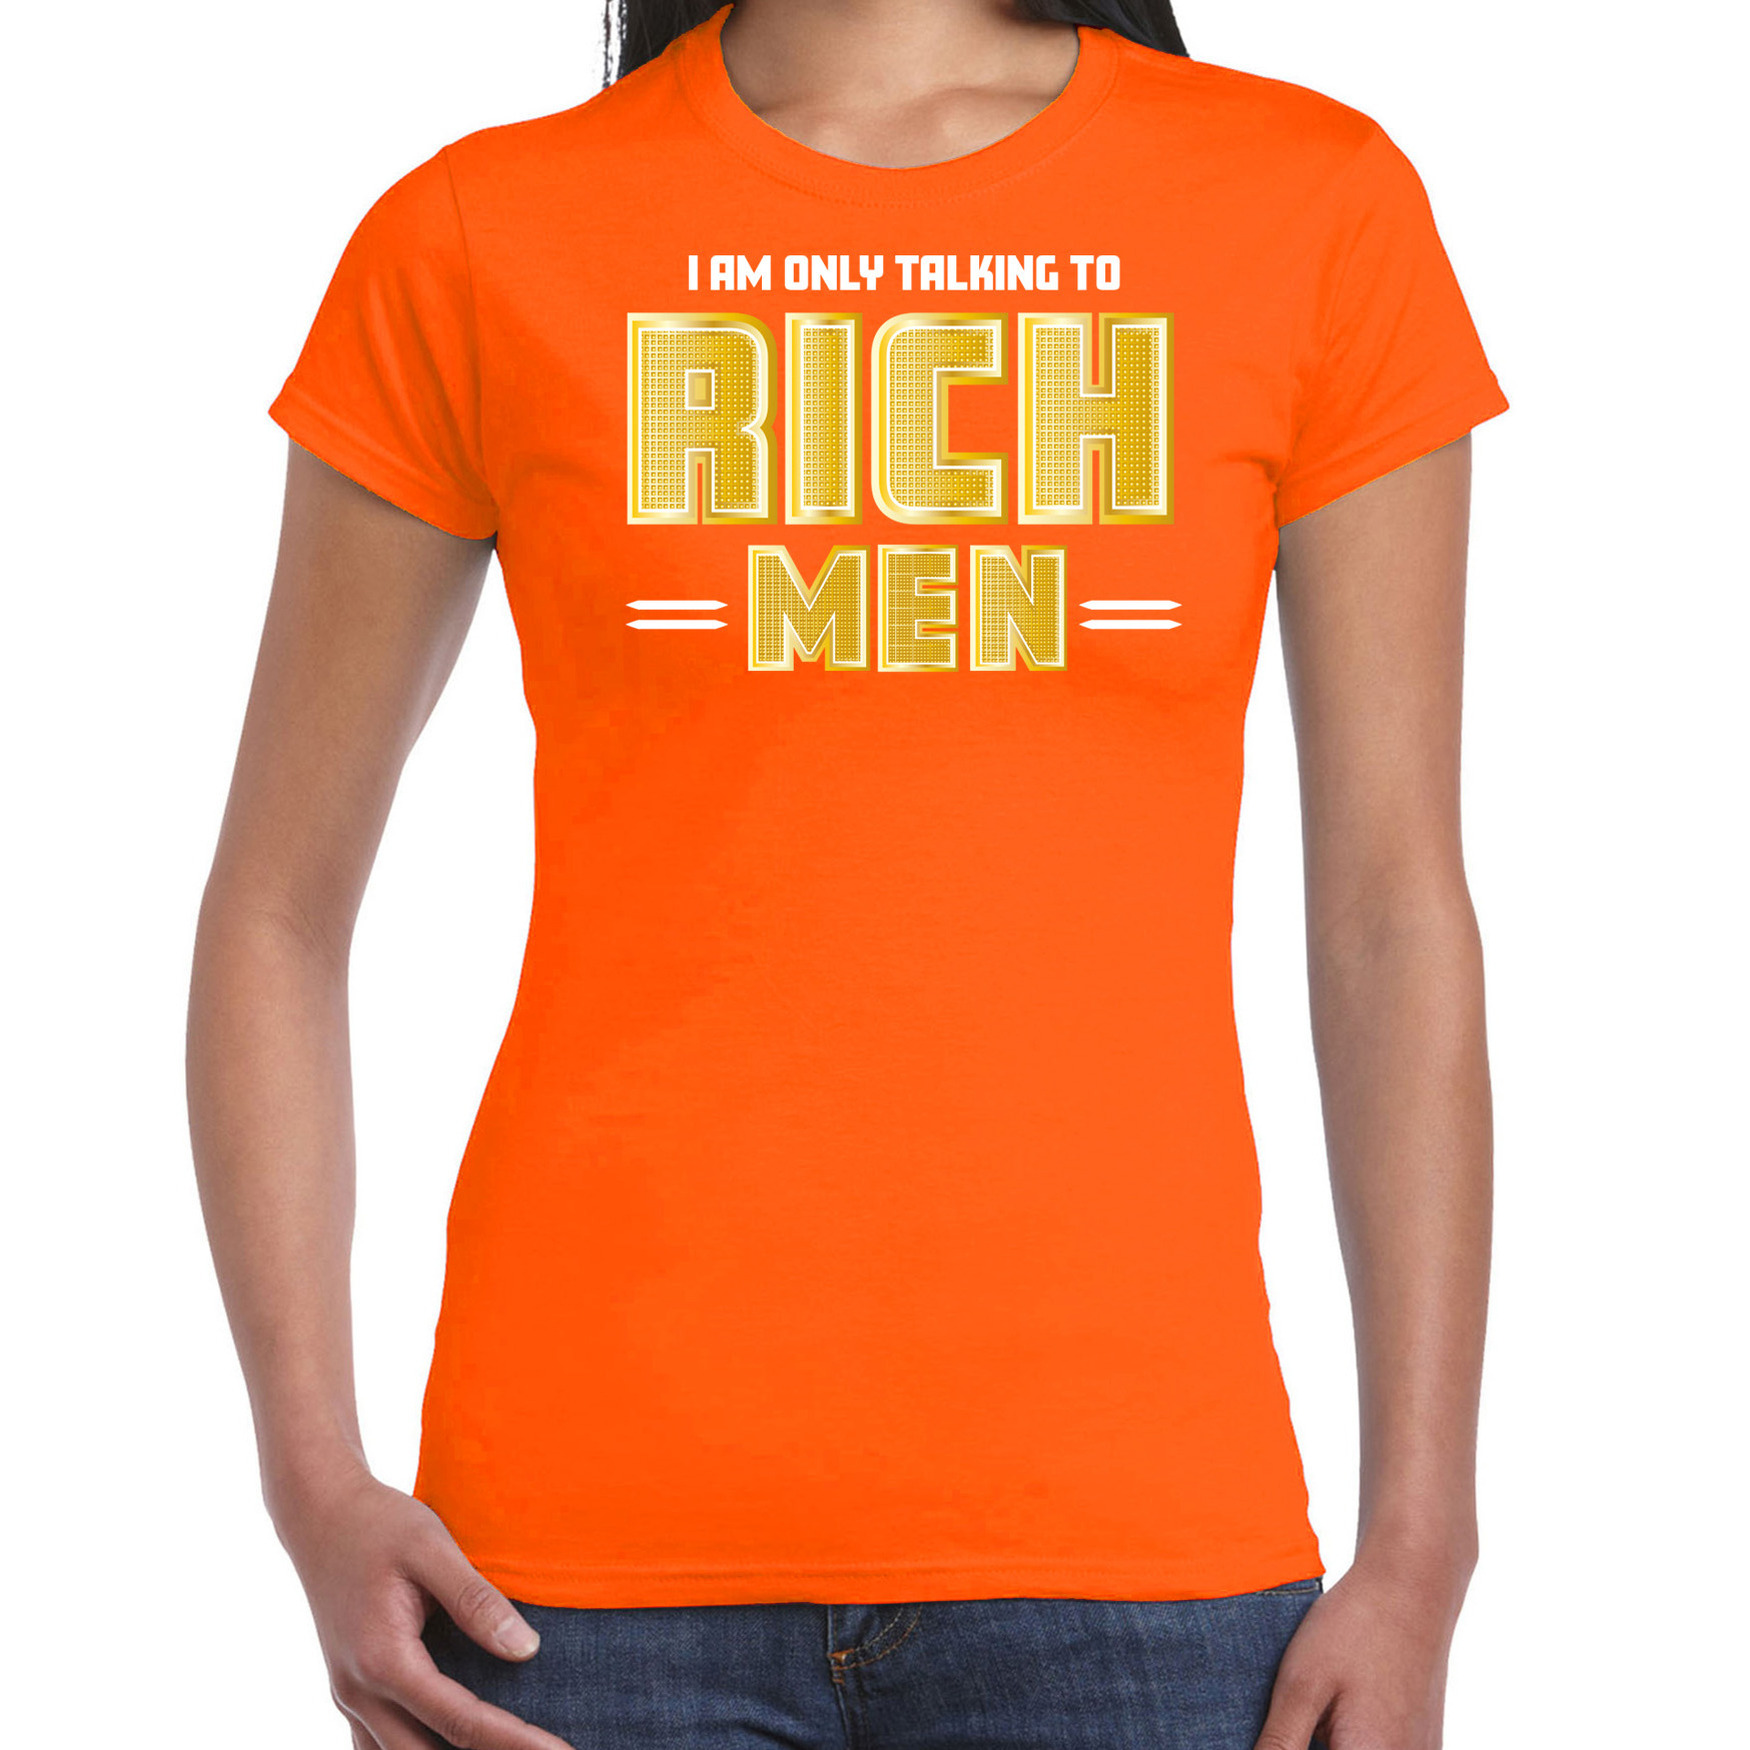 Foute party t-shirt voor dames Gold digger oranje carnaval-themafeest